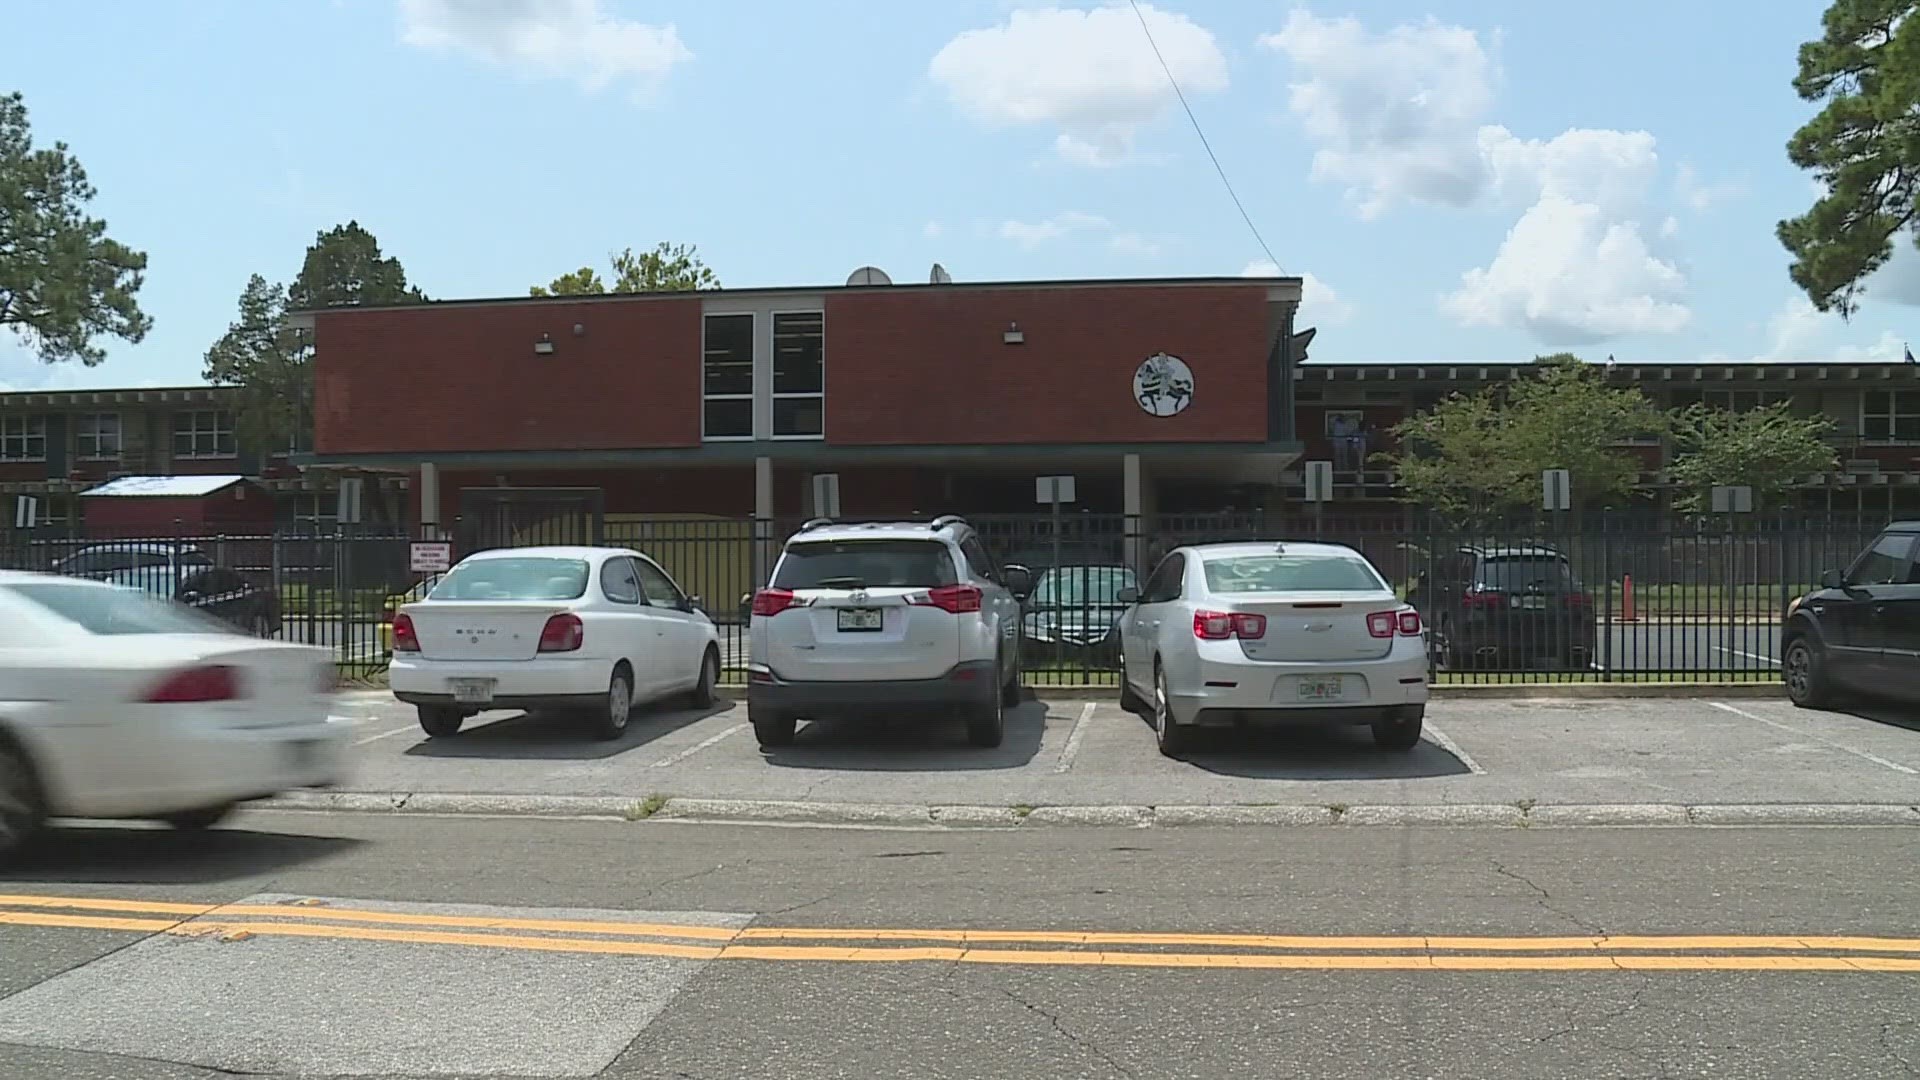 A spokesperson for Duval County Public Schools said Charger Academy leadership followed correct procedures in reporting the incident to law enforcement and DCF.